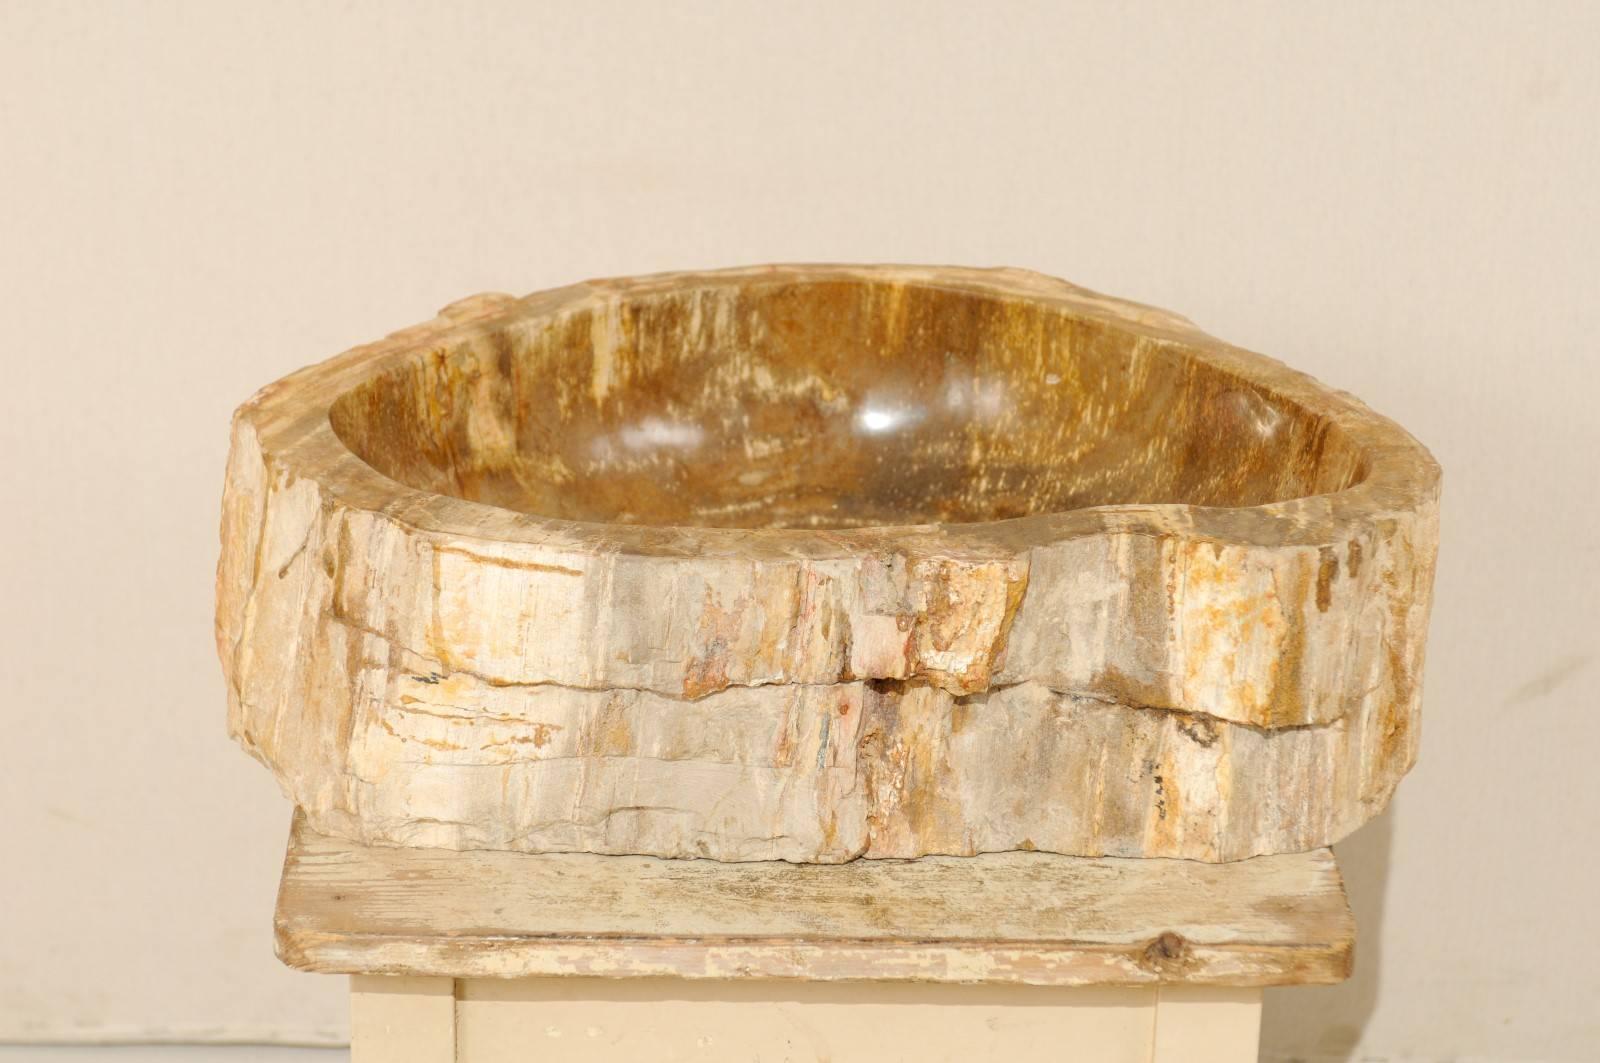 Polished Petrified Wood Sink of Neutral Cream, Tan, Light Brown and Beige Hues 1